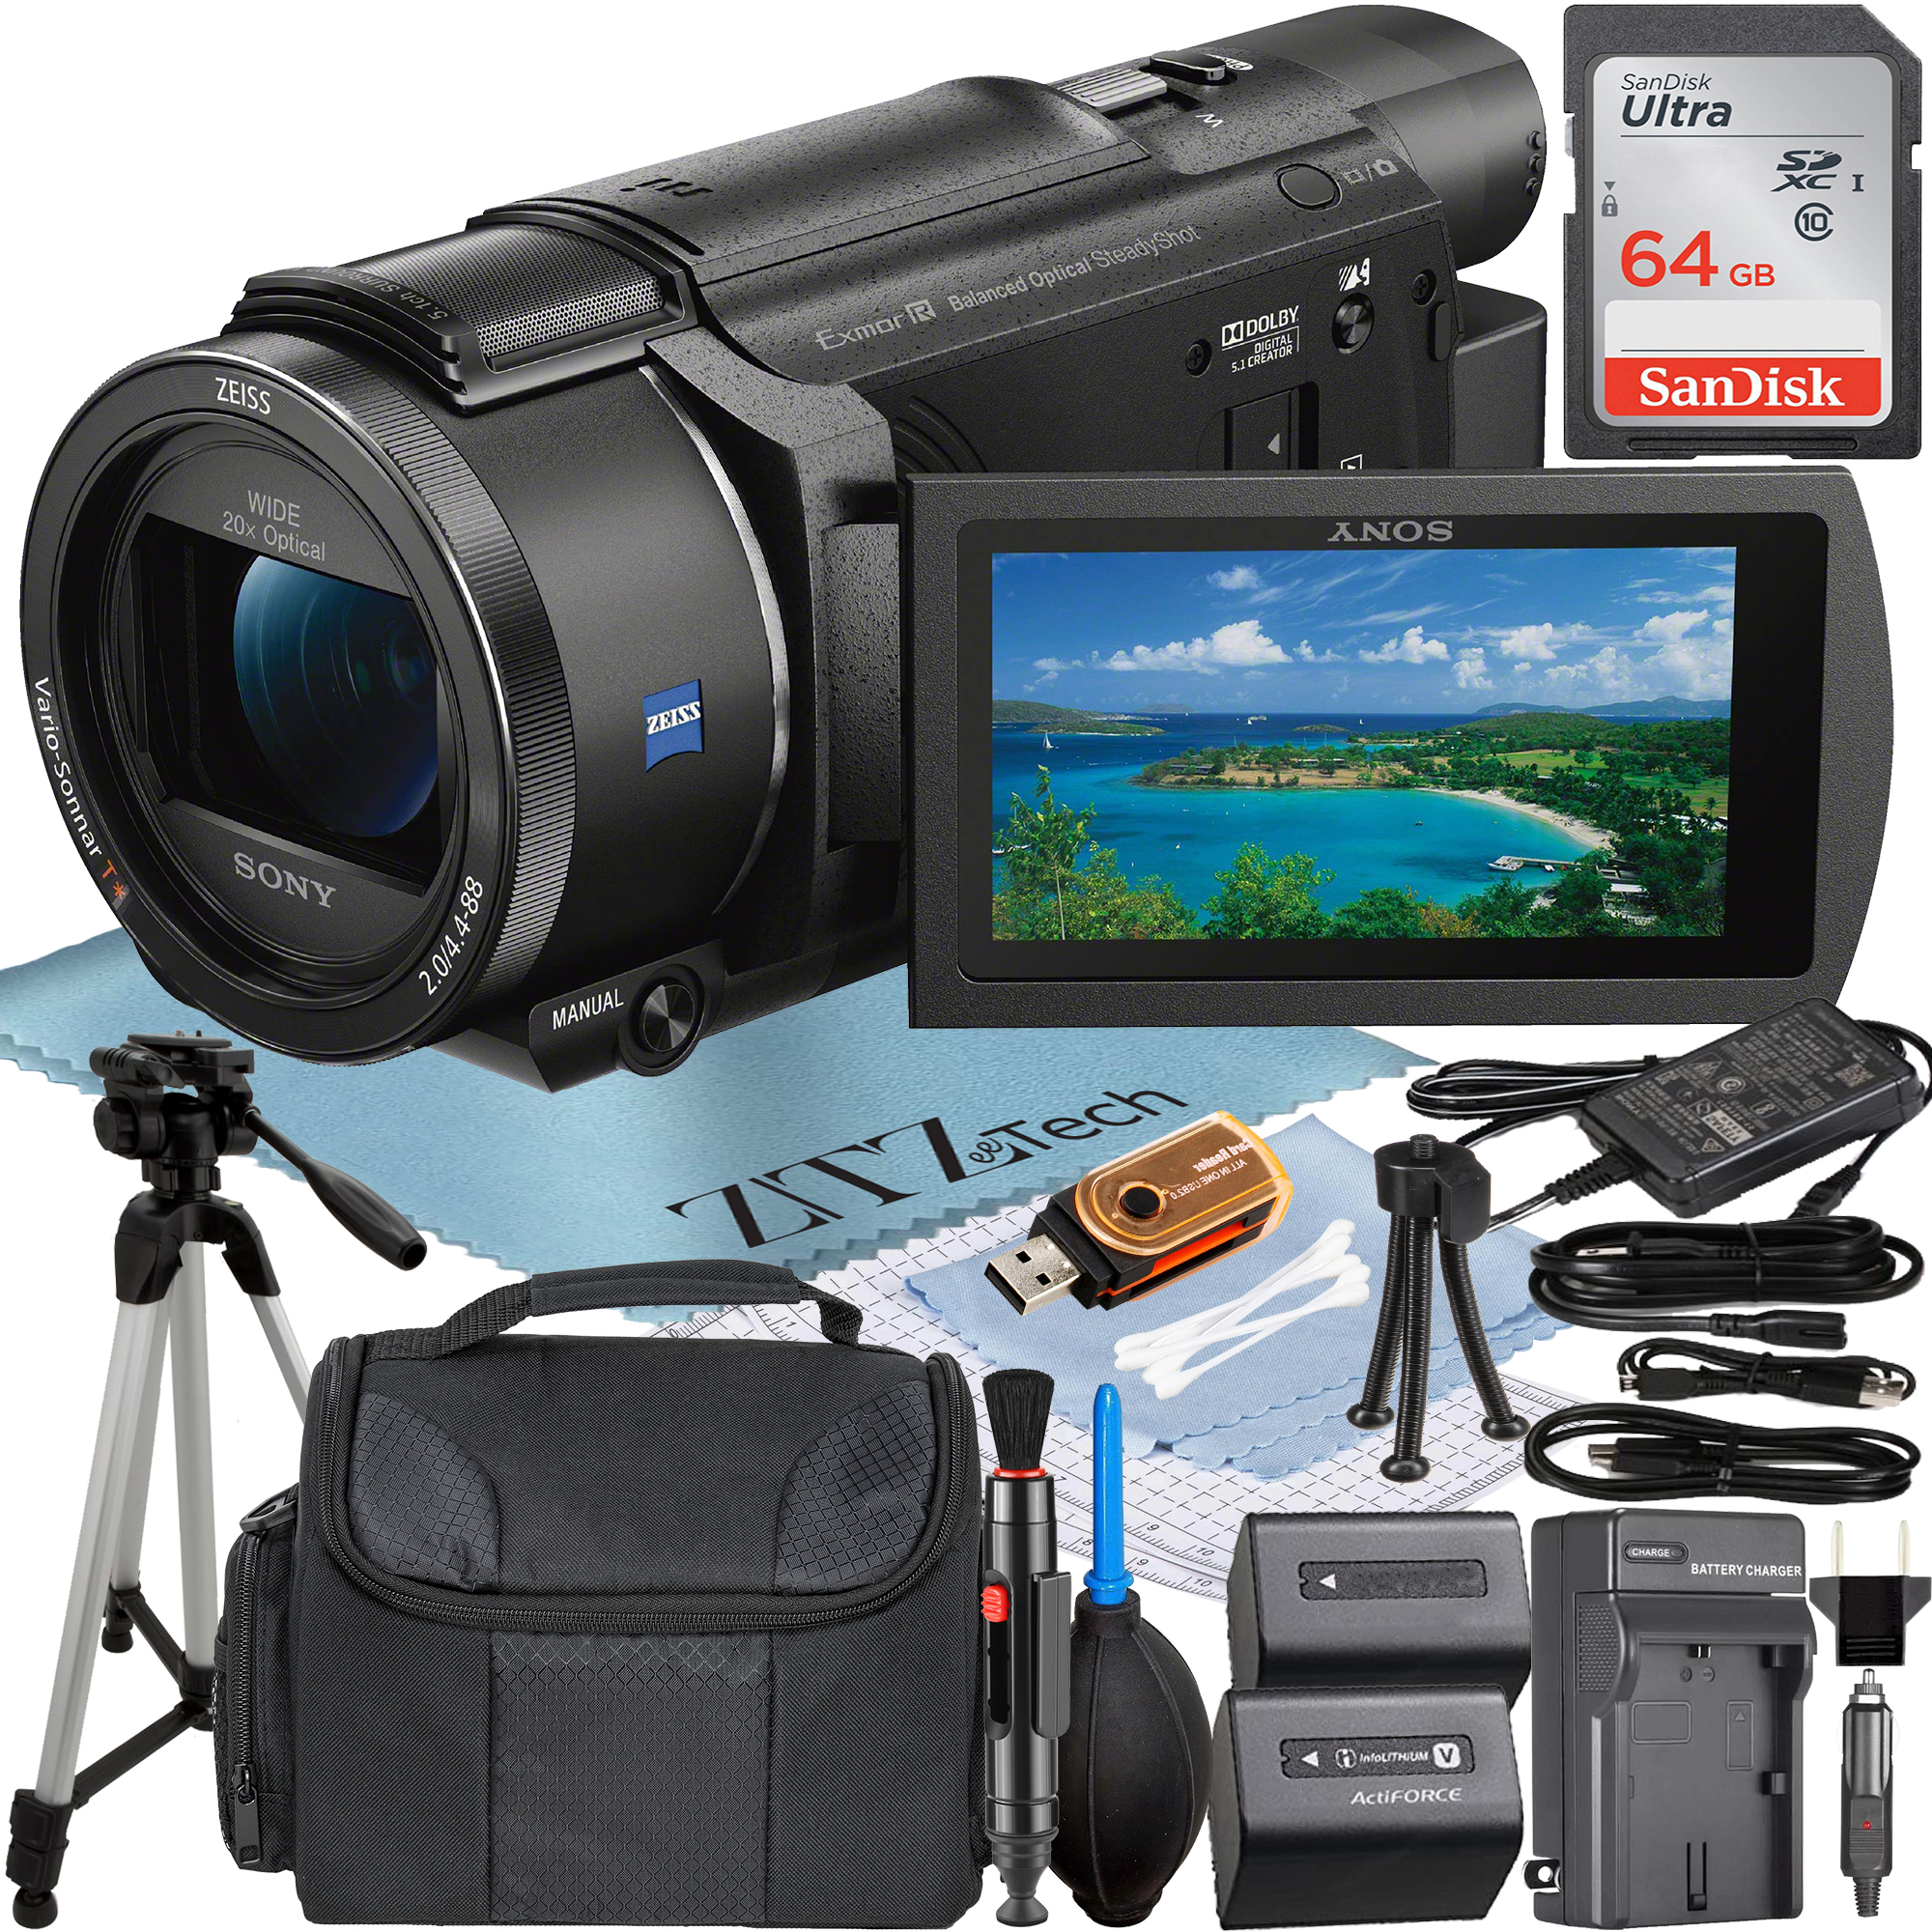 Sony FDR-AX53 4K Ultra HD Handycam Camcorder with 64GB SanDisk Memory Card + Charger + Case + Tripod + ZeeTech Accessory Bundle